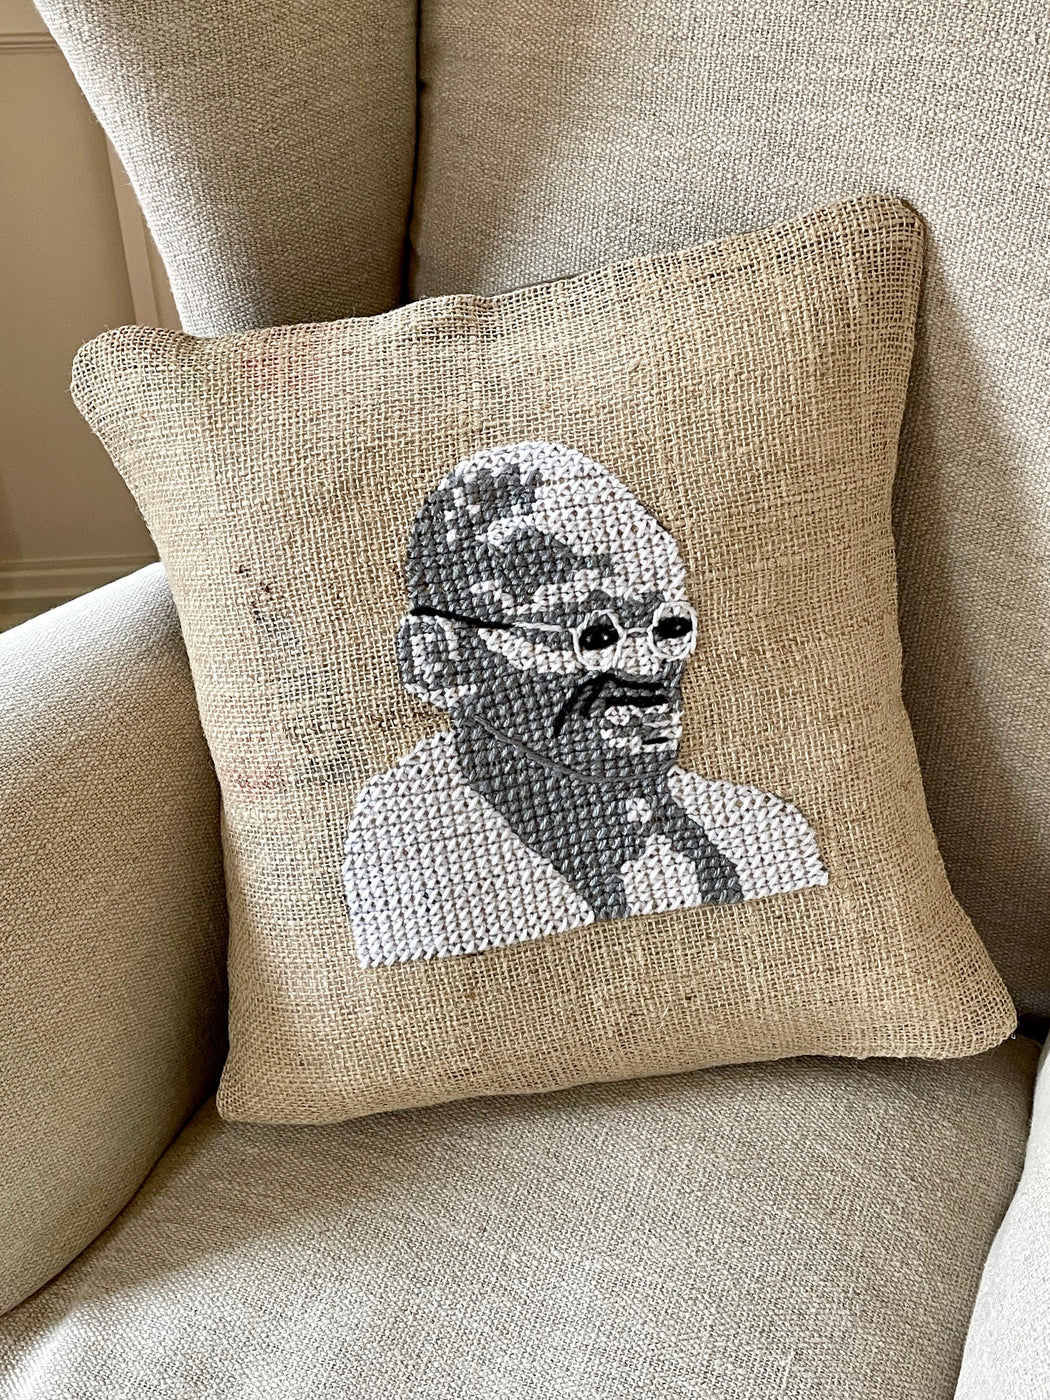 "Ghandi" Hand-Embroidered Pillow